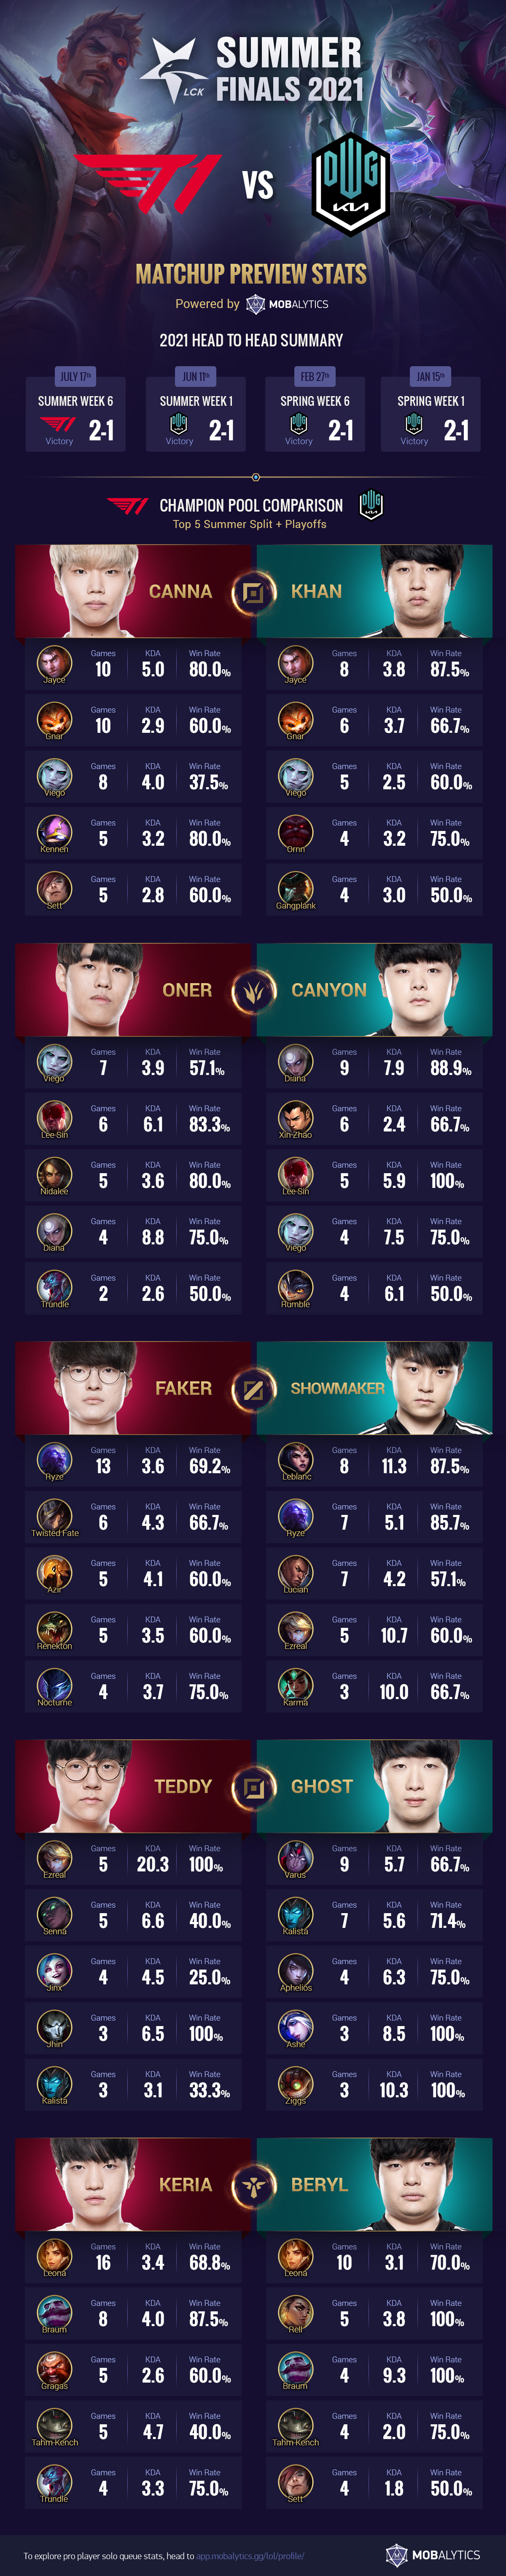 LCK Summer Finals 2021: T1 vs DWG KIA - Matchup Preview Stats (Infographic)